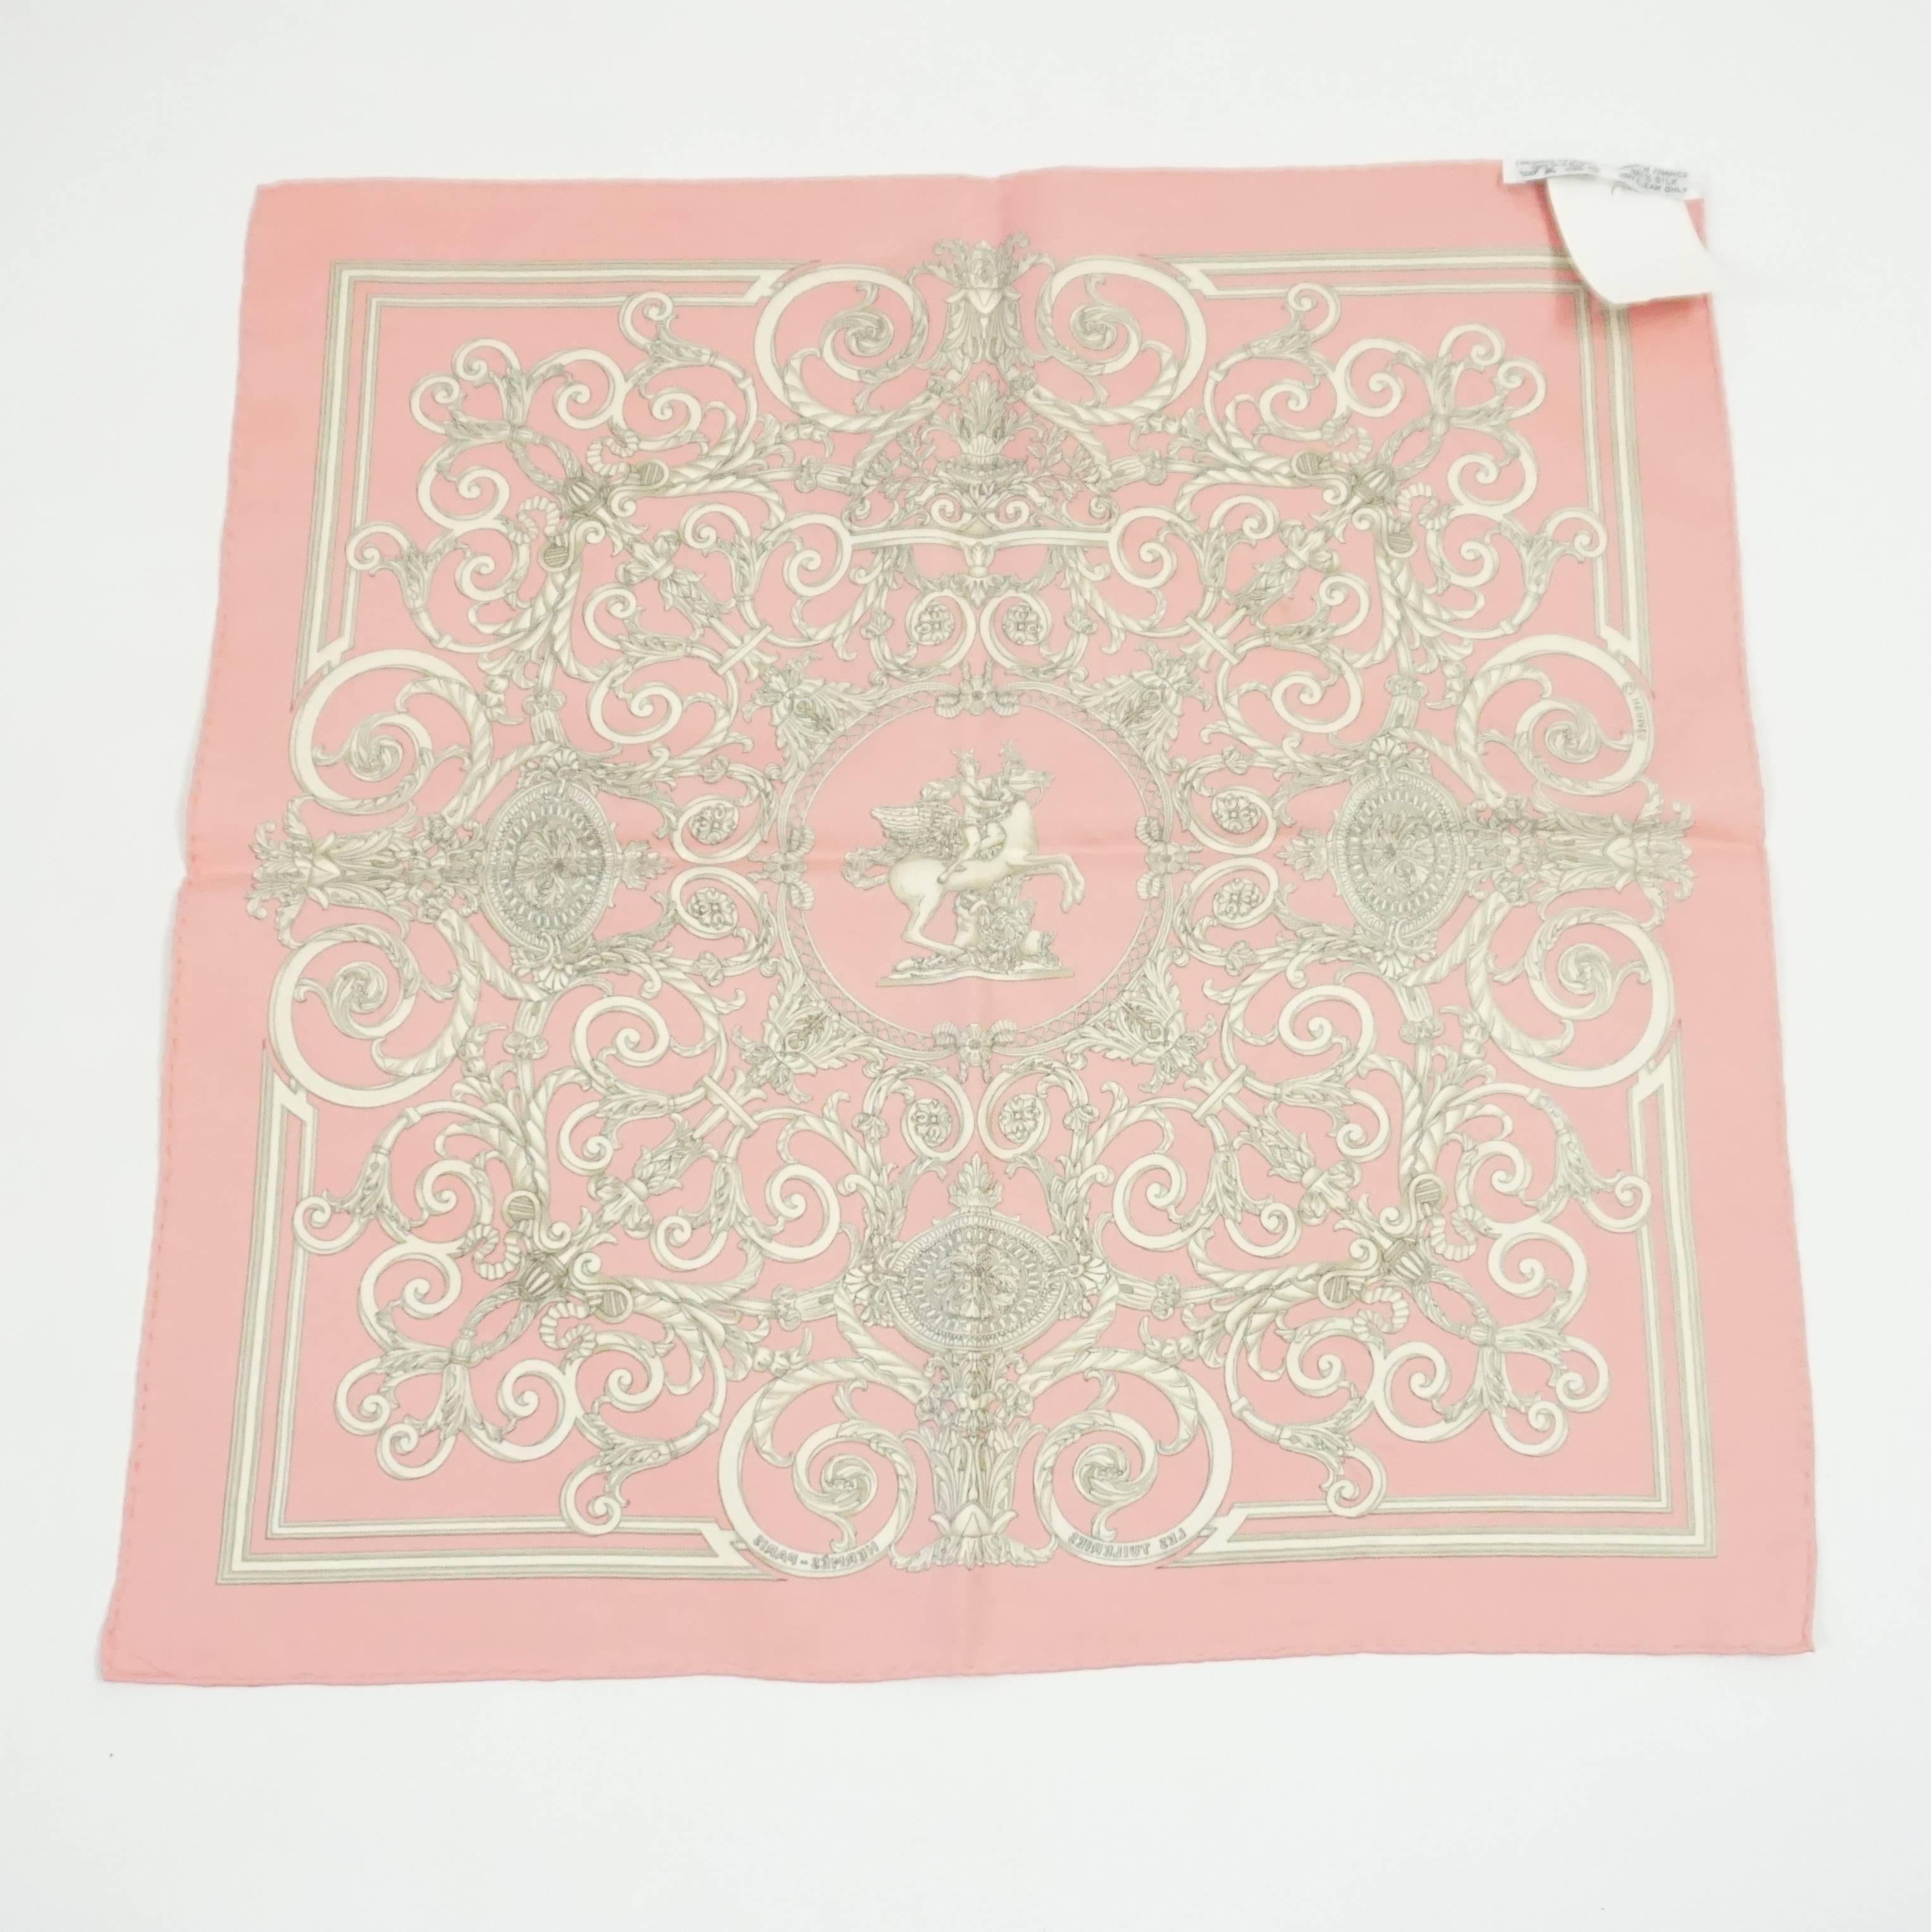 This Hermes pocket square is pink with a light gold Renaissance print. Its theme is 